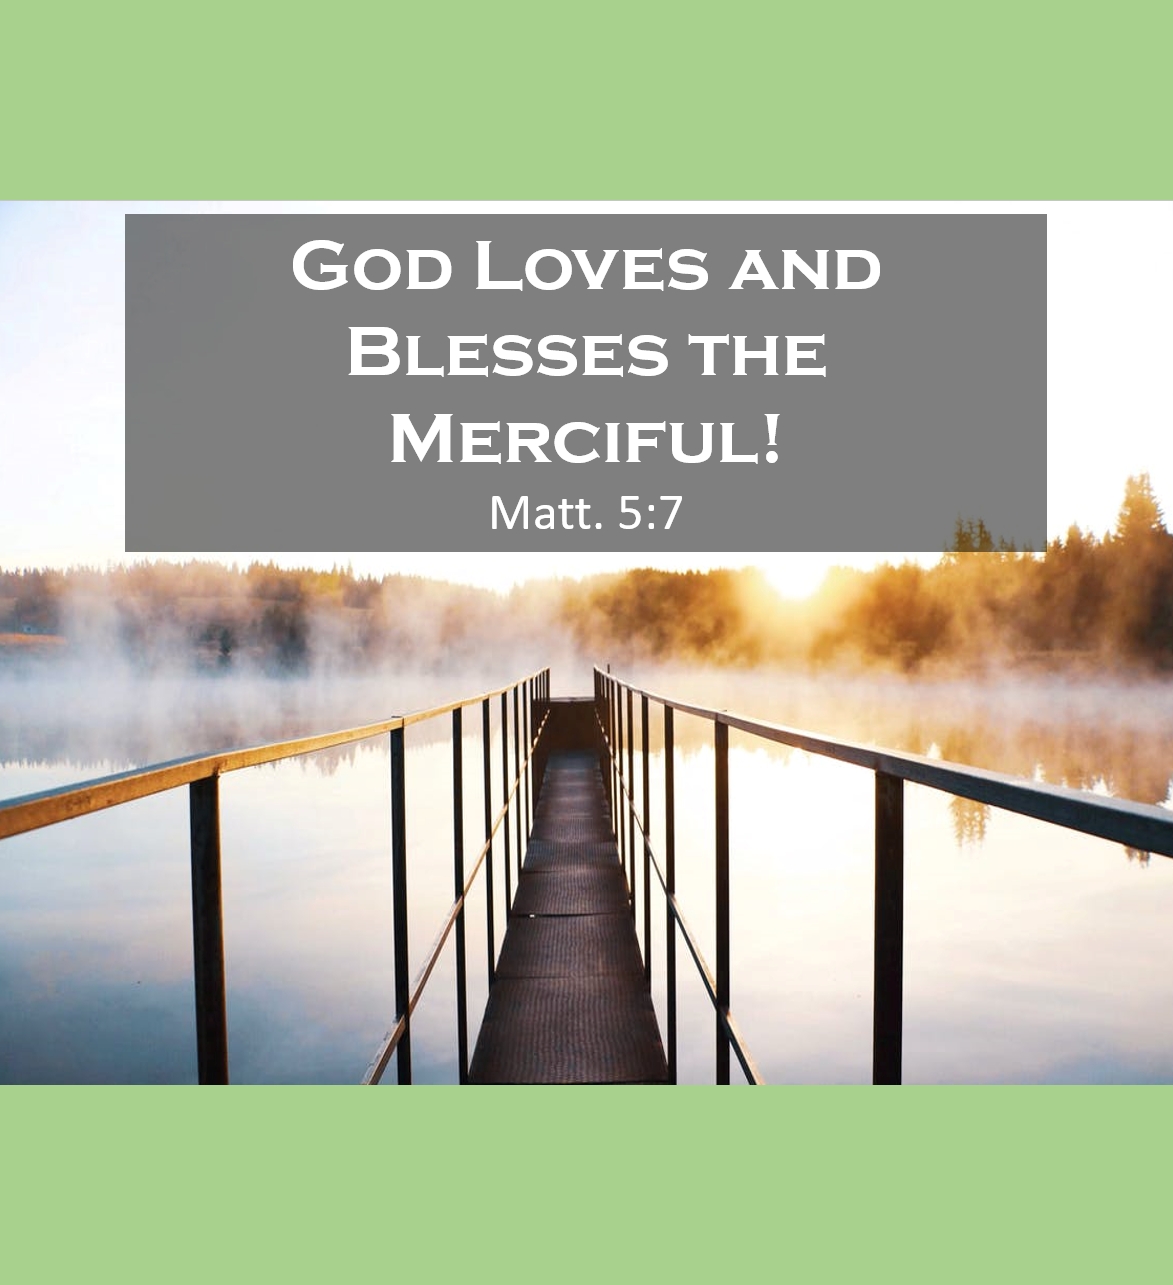 God Loves and Blesses the Merciful